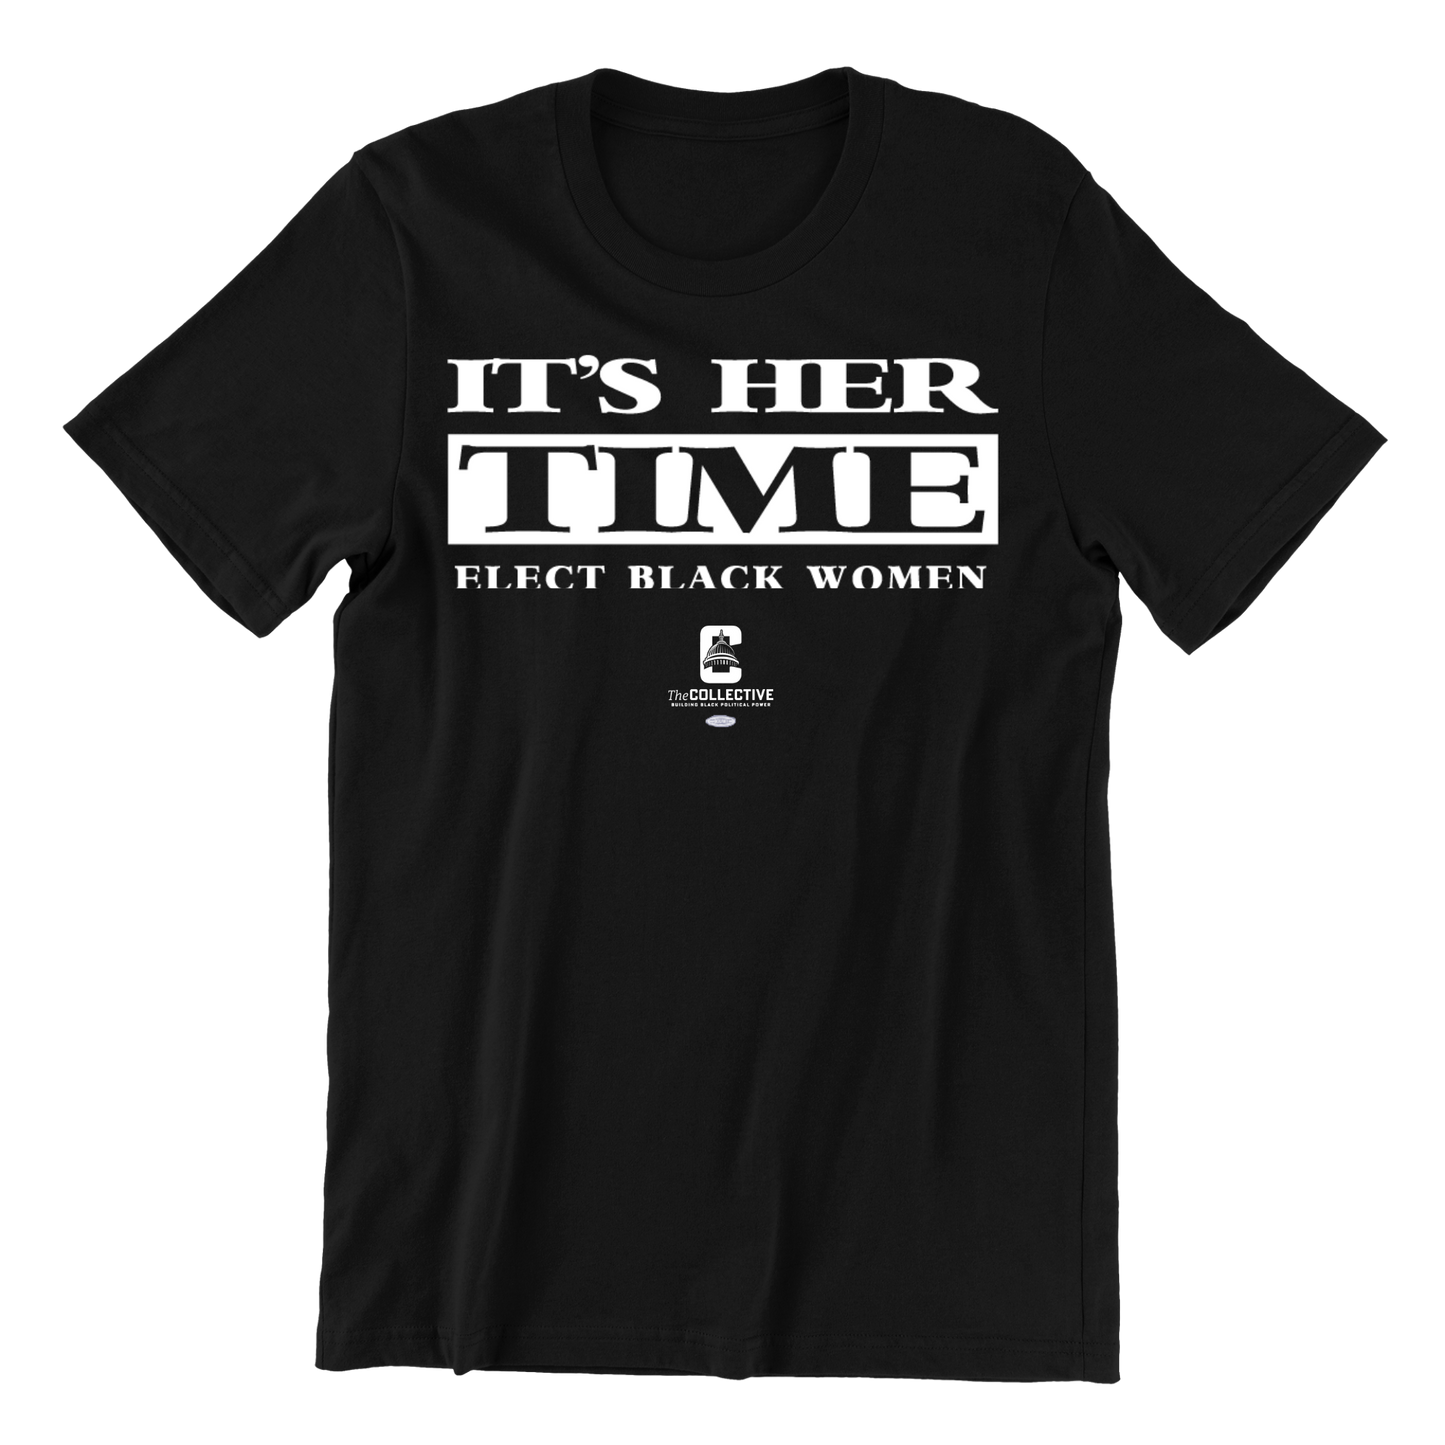 IT'S HER TIME TEE